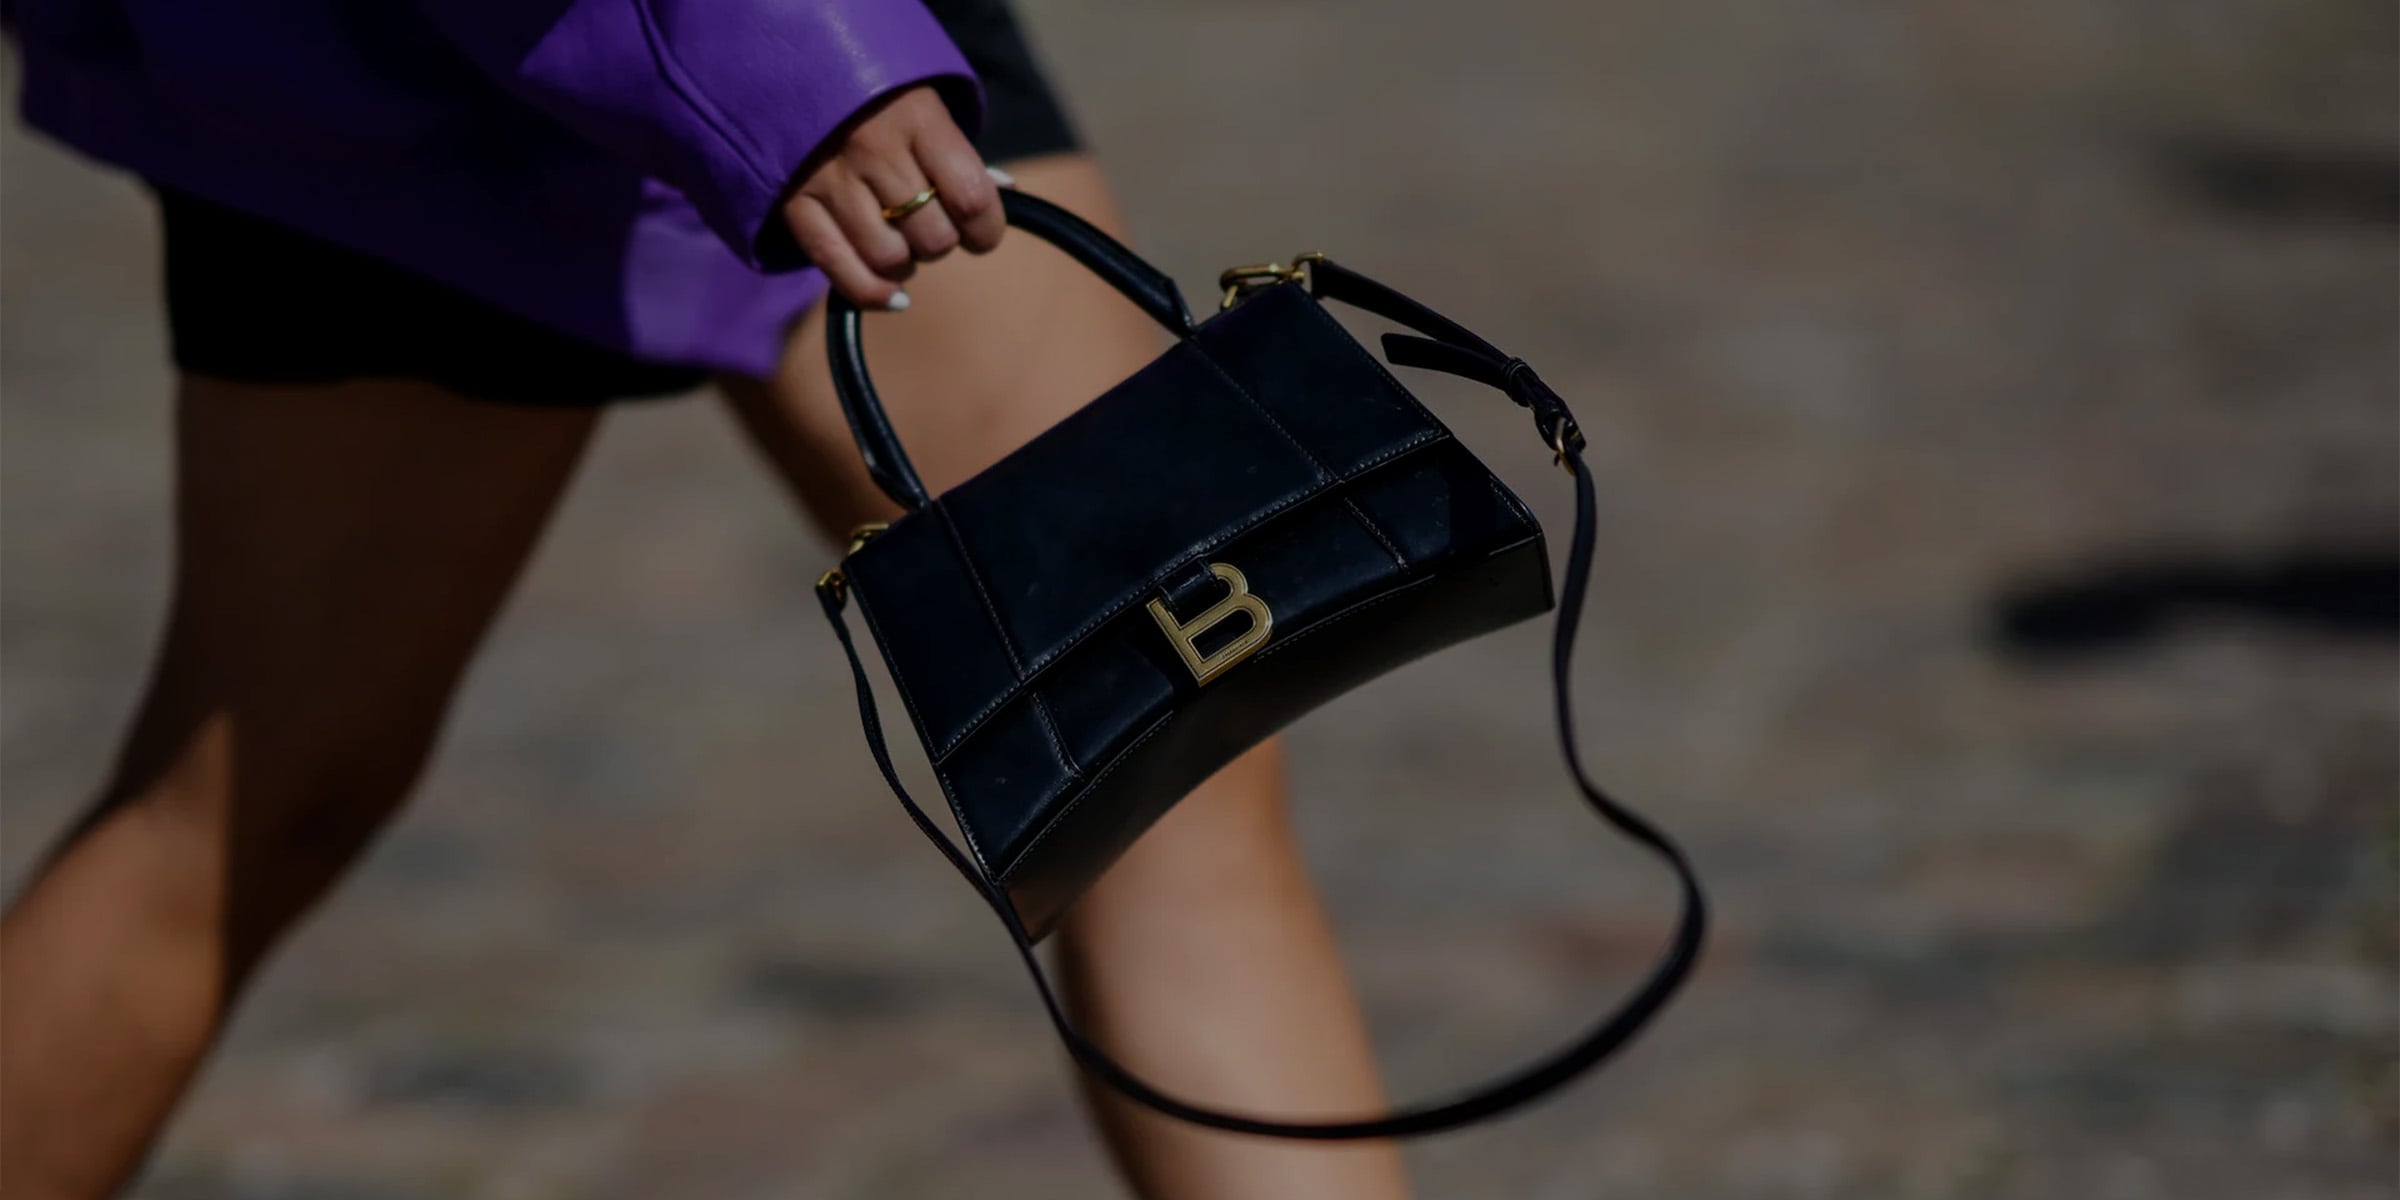 Grunge With Grace: 7 Best Balenciaga Bags To Invest In